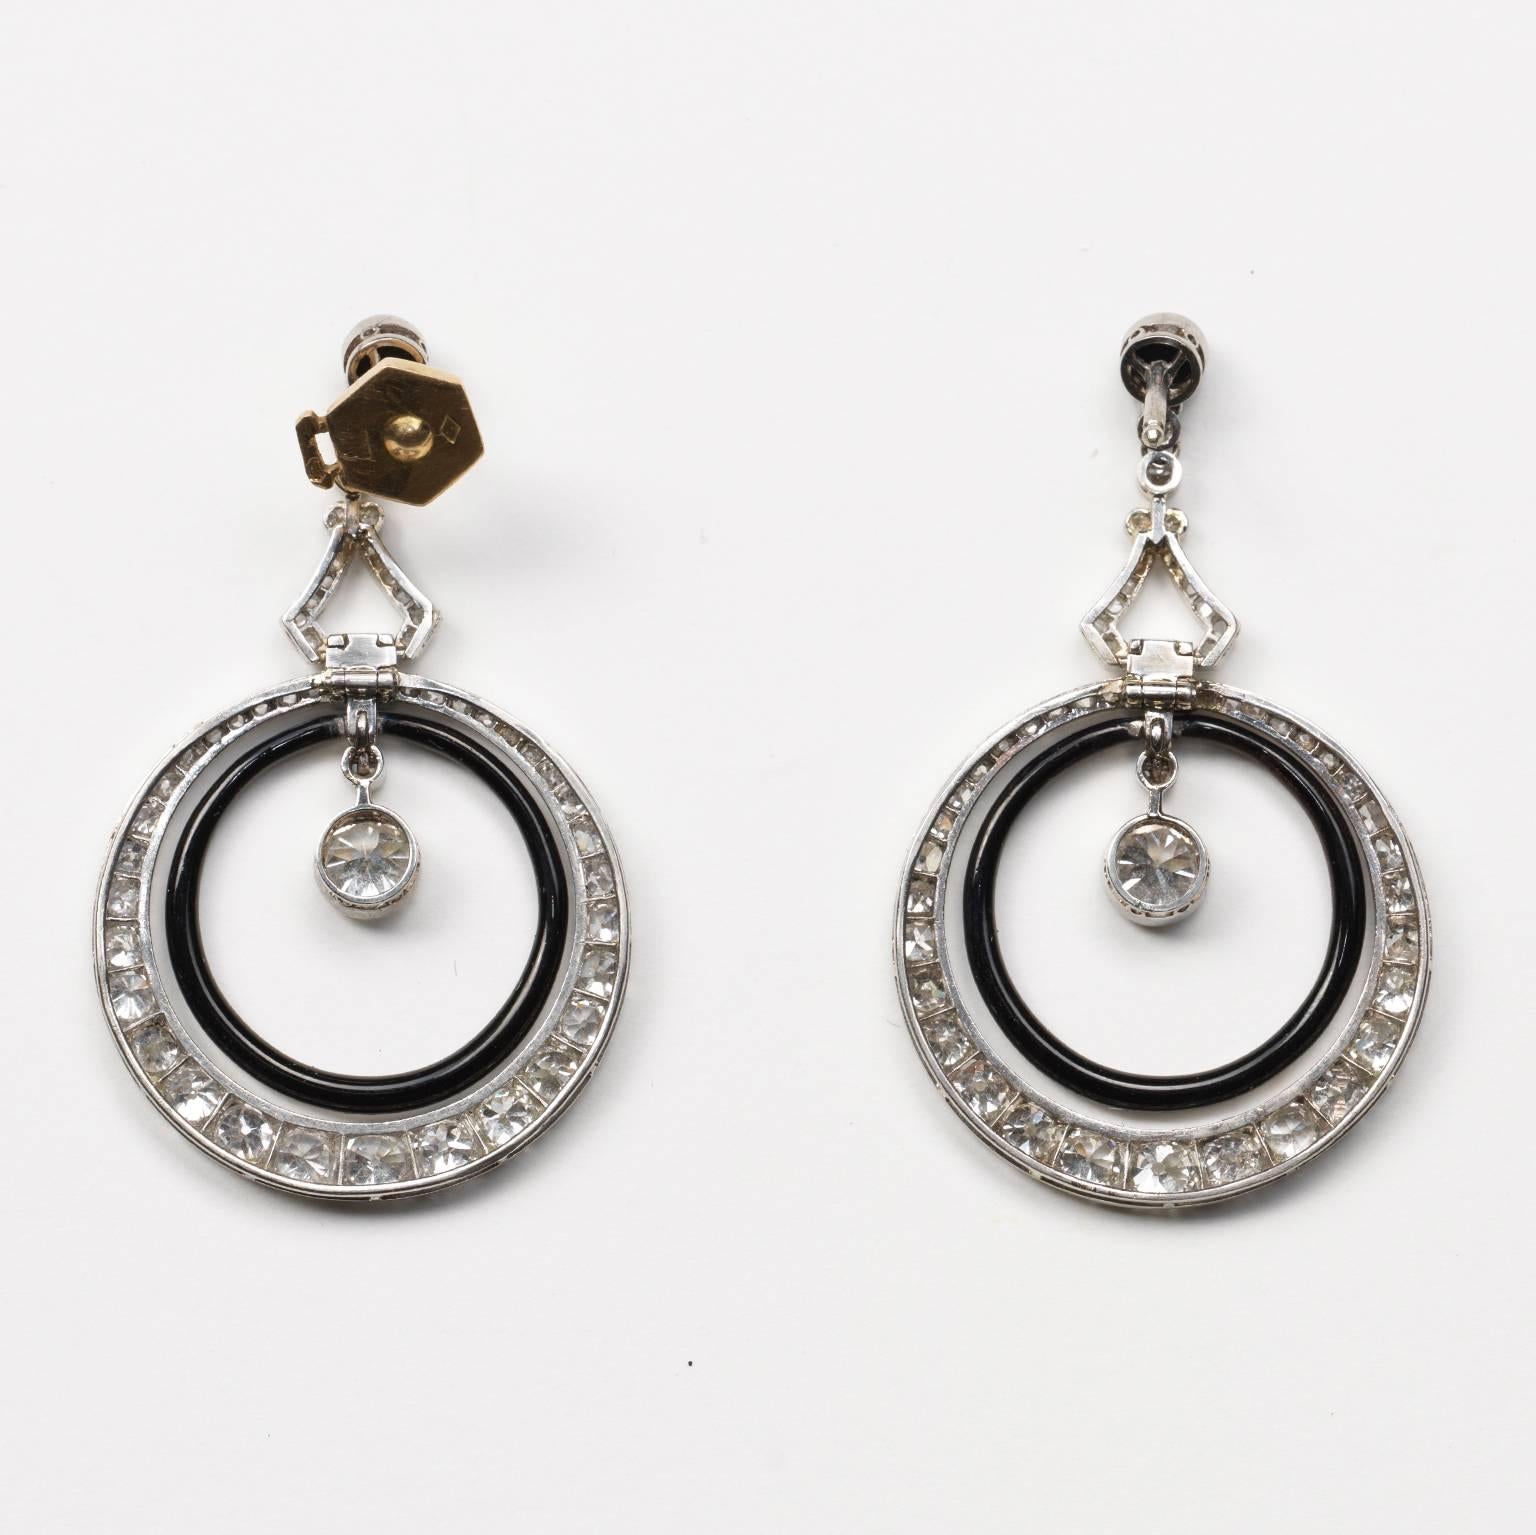 A pair of platinum and diamond (app. 3.6 carats) Art Deco earrings set with old-cut diamonds, the top is a small cabochon-cut onyx below which are two hoops connected by a triangle: the inner hoop is decorated with black enamel and the outer hoop is